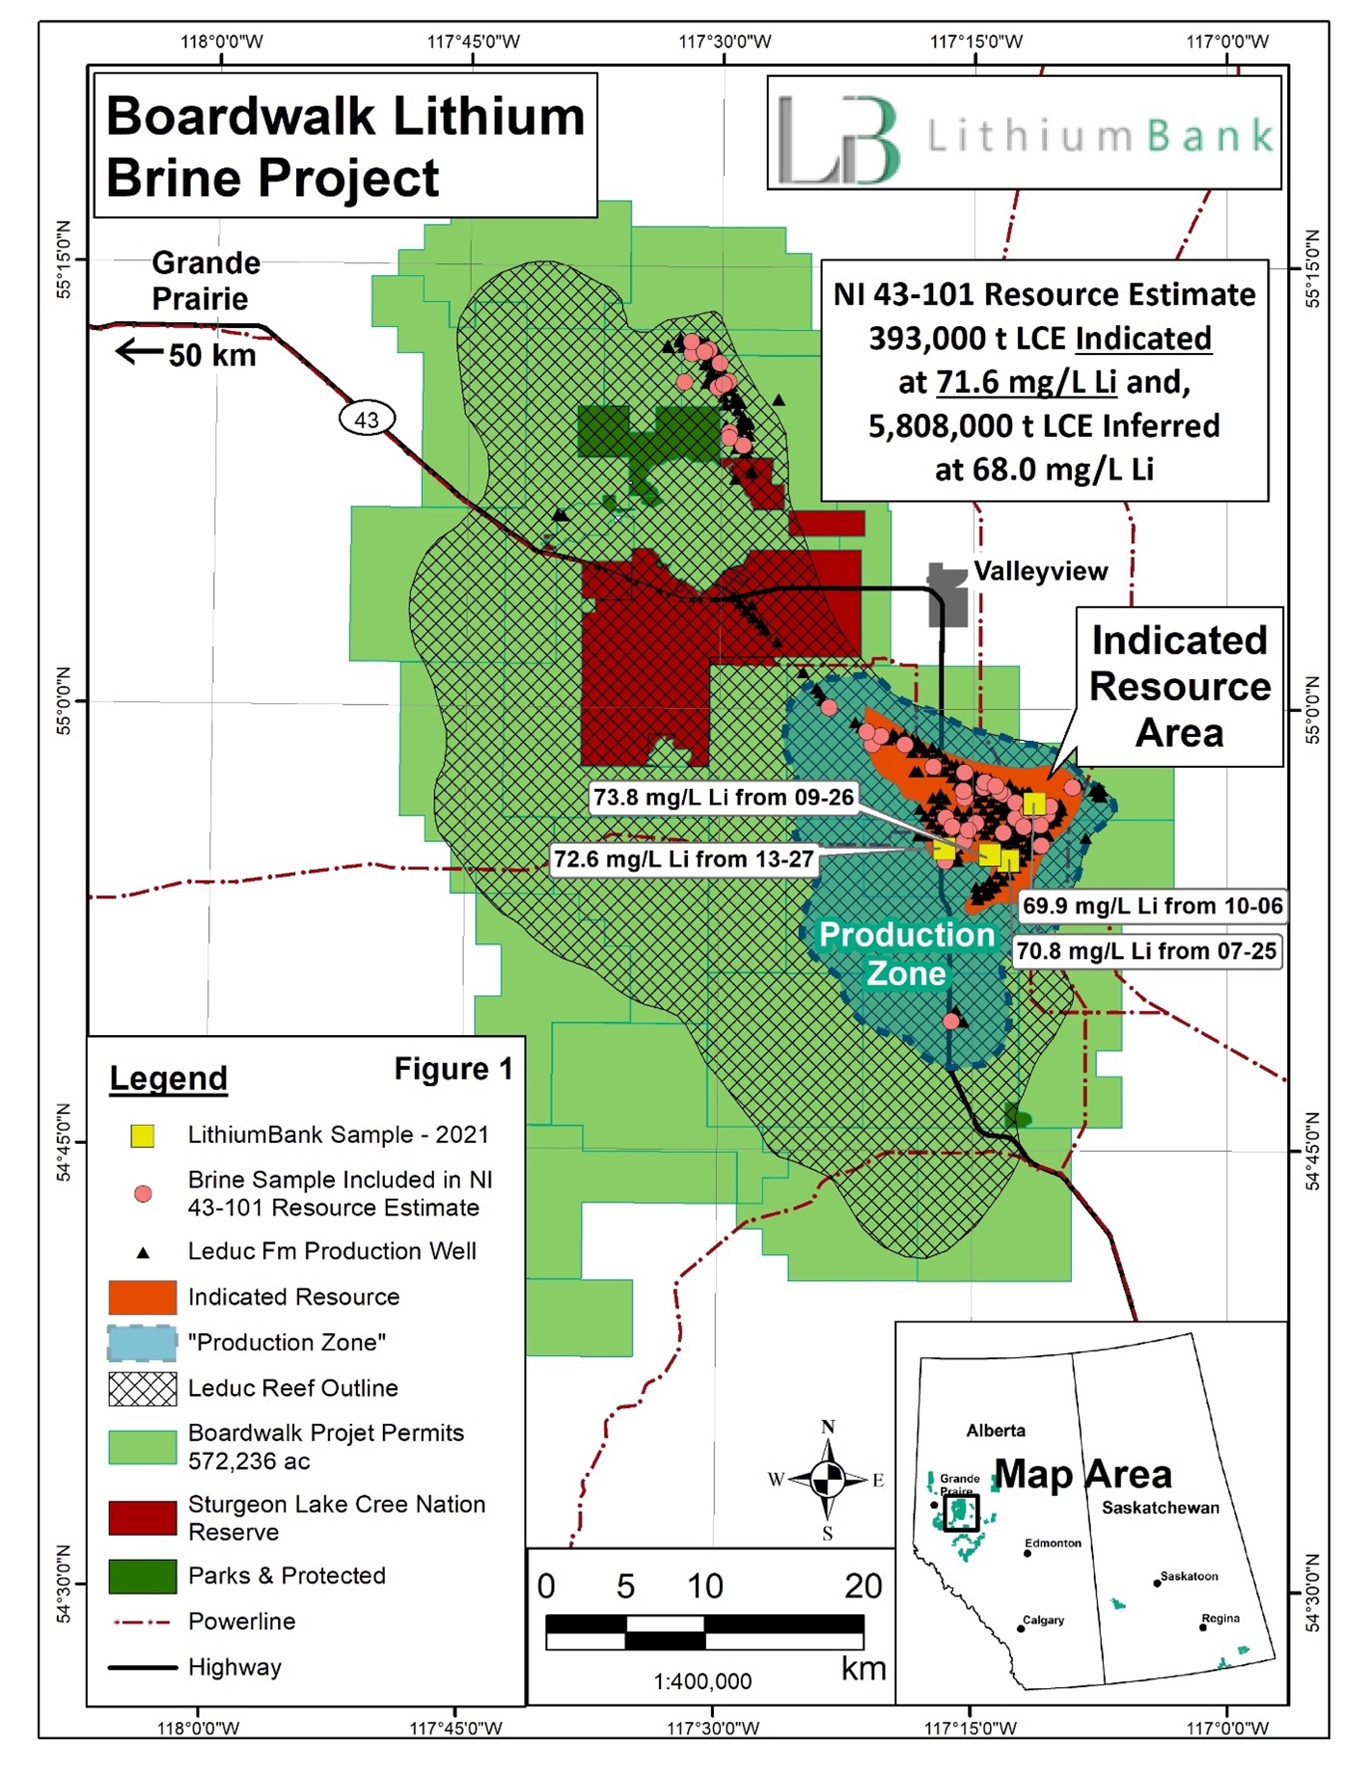 Indicated Resource area and Proposed “Production Zone” from LithiumBank’s Boardwalk Lithium Brine Project.